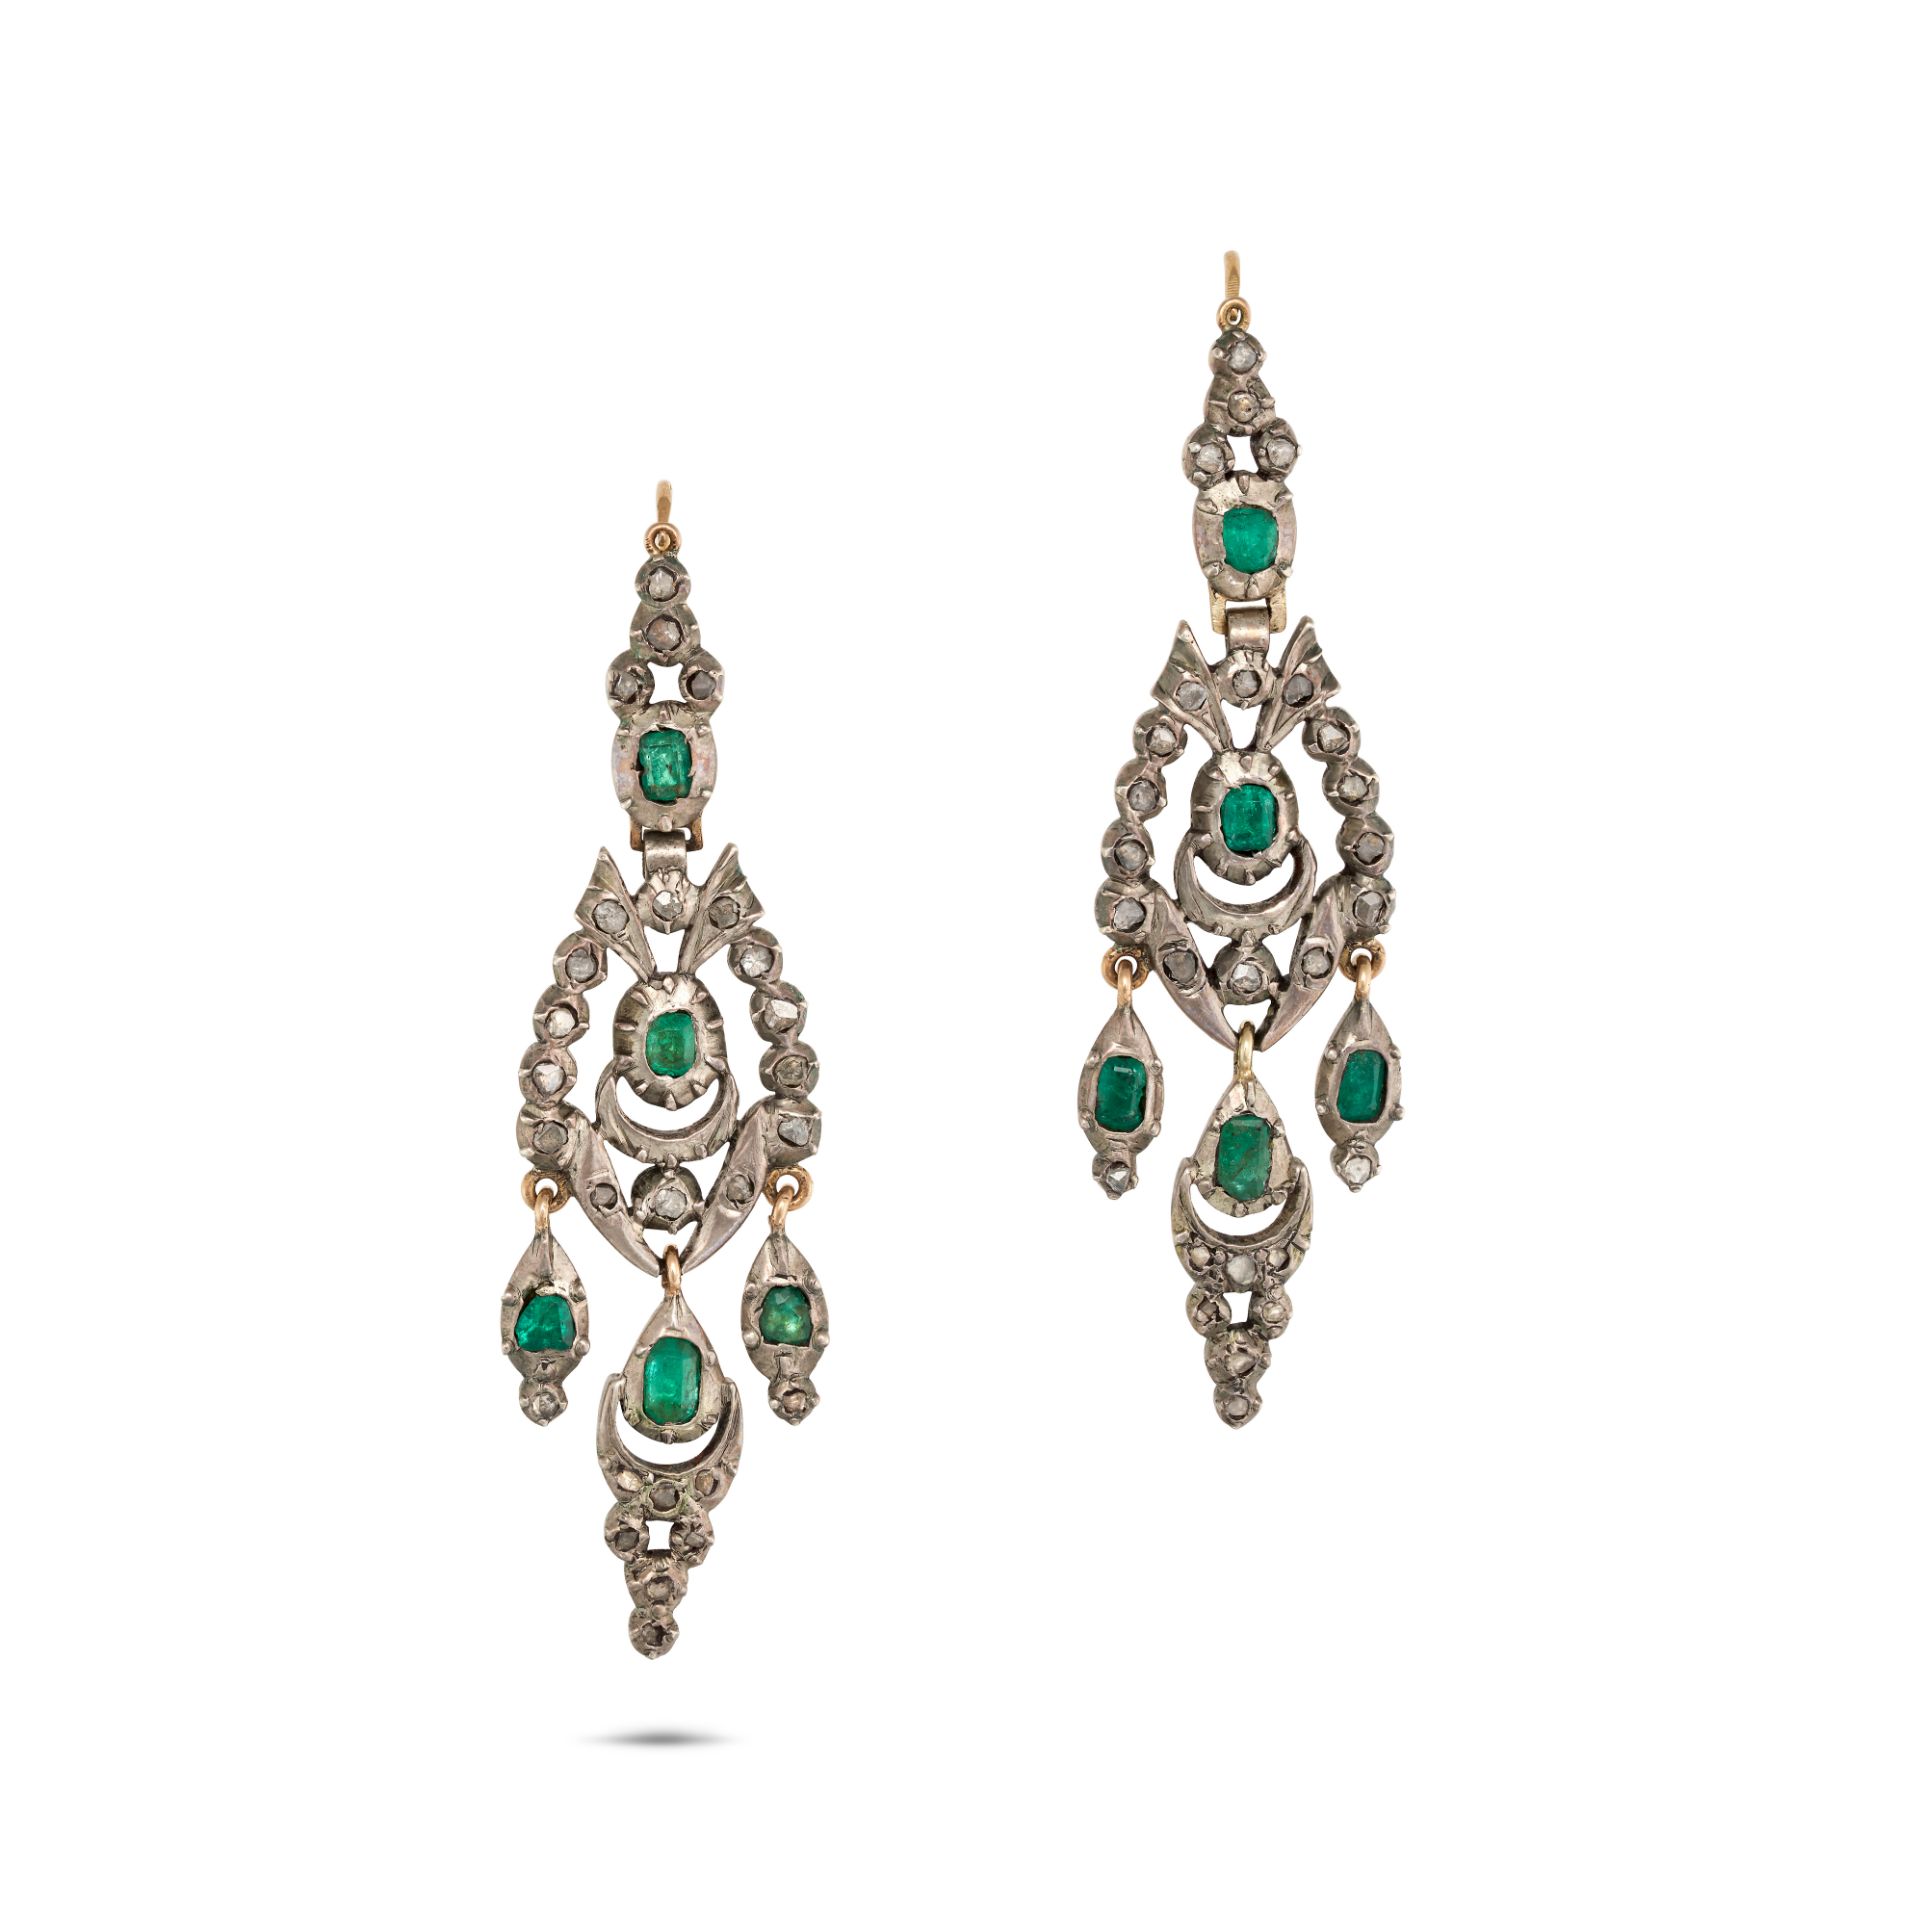 A PAIR OF ANTIQUE IBERIAN EMERALD AND DIAMOND DROP EARRINGS in yellow gold and silver, the articu...